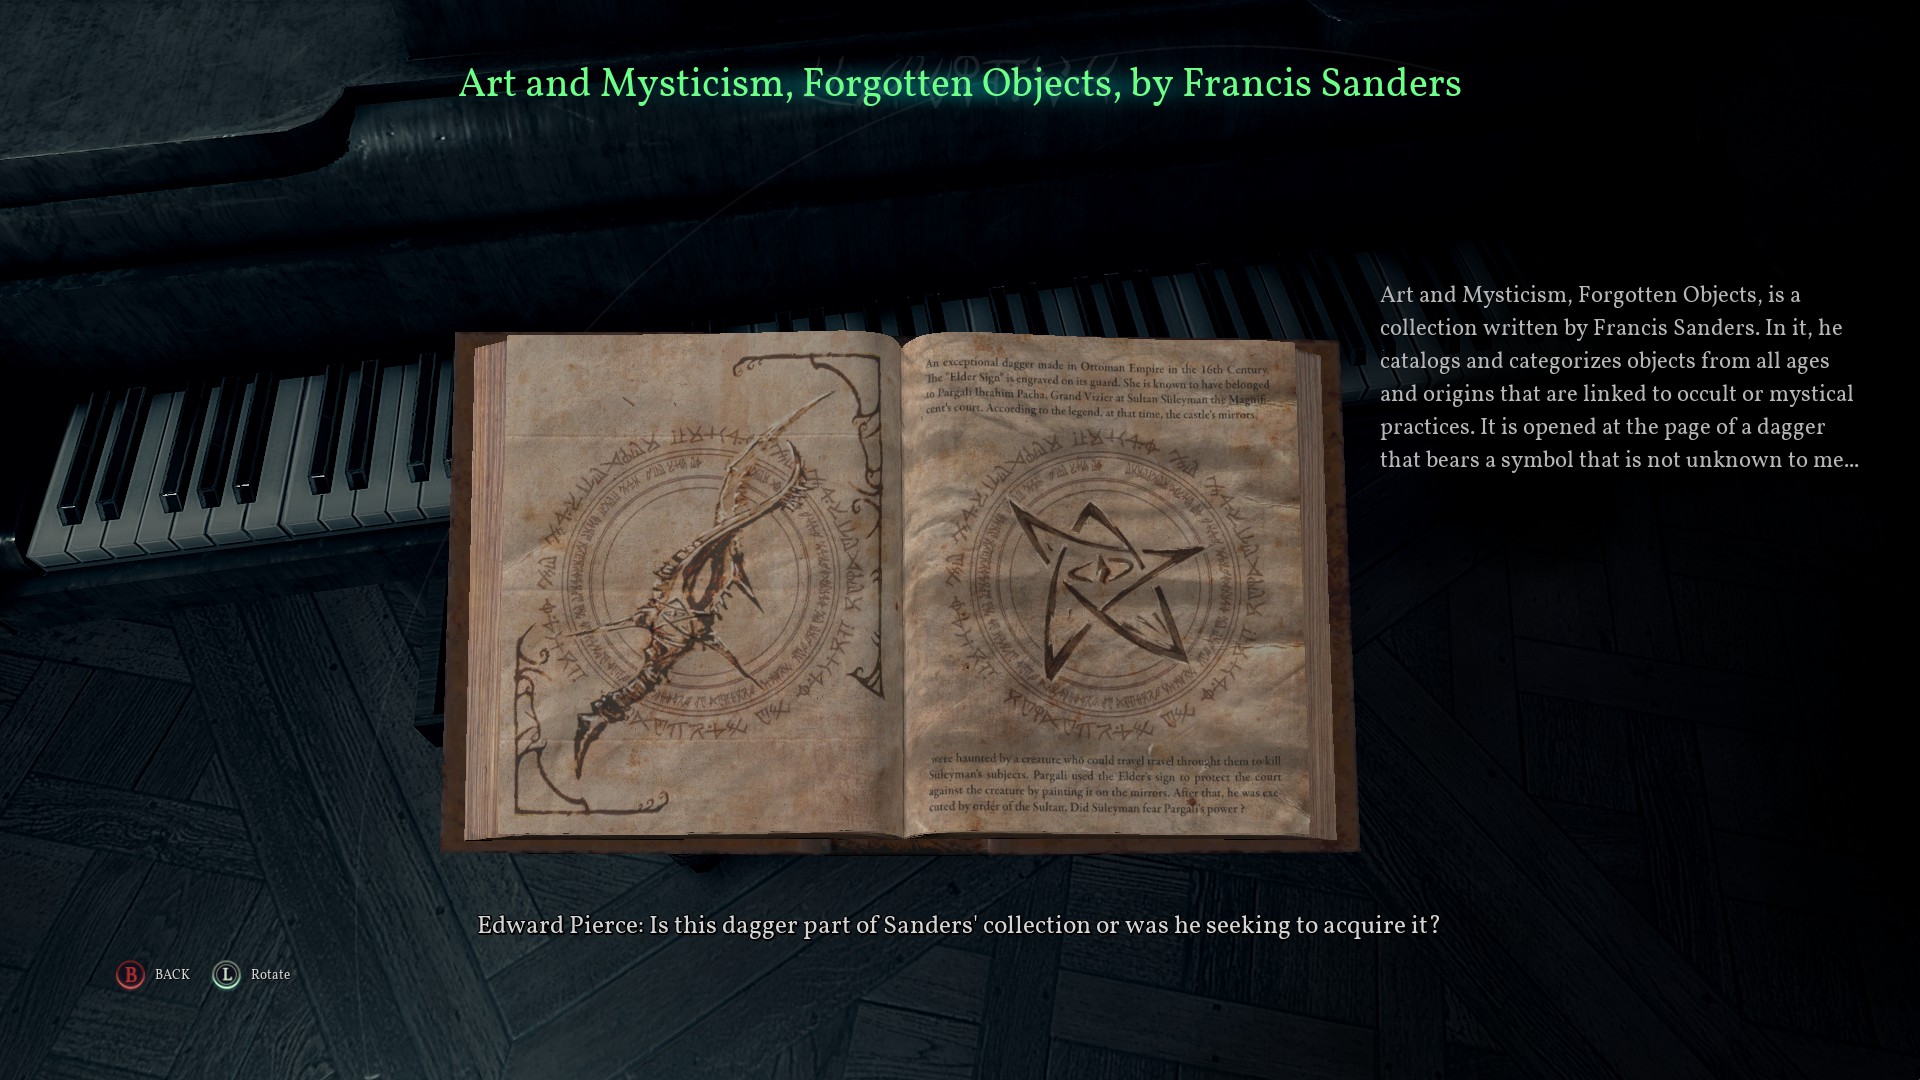 Call of Cthulhu Detailed Information About R’lyehian (Cthuvian) Texts and Inscriptions Guide - Book: Art and Mysticism, Forgotten Objects, by Francis Sanders - B39D261